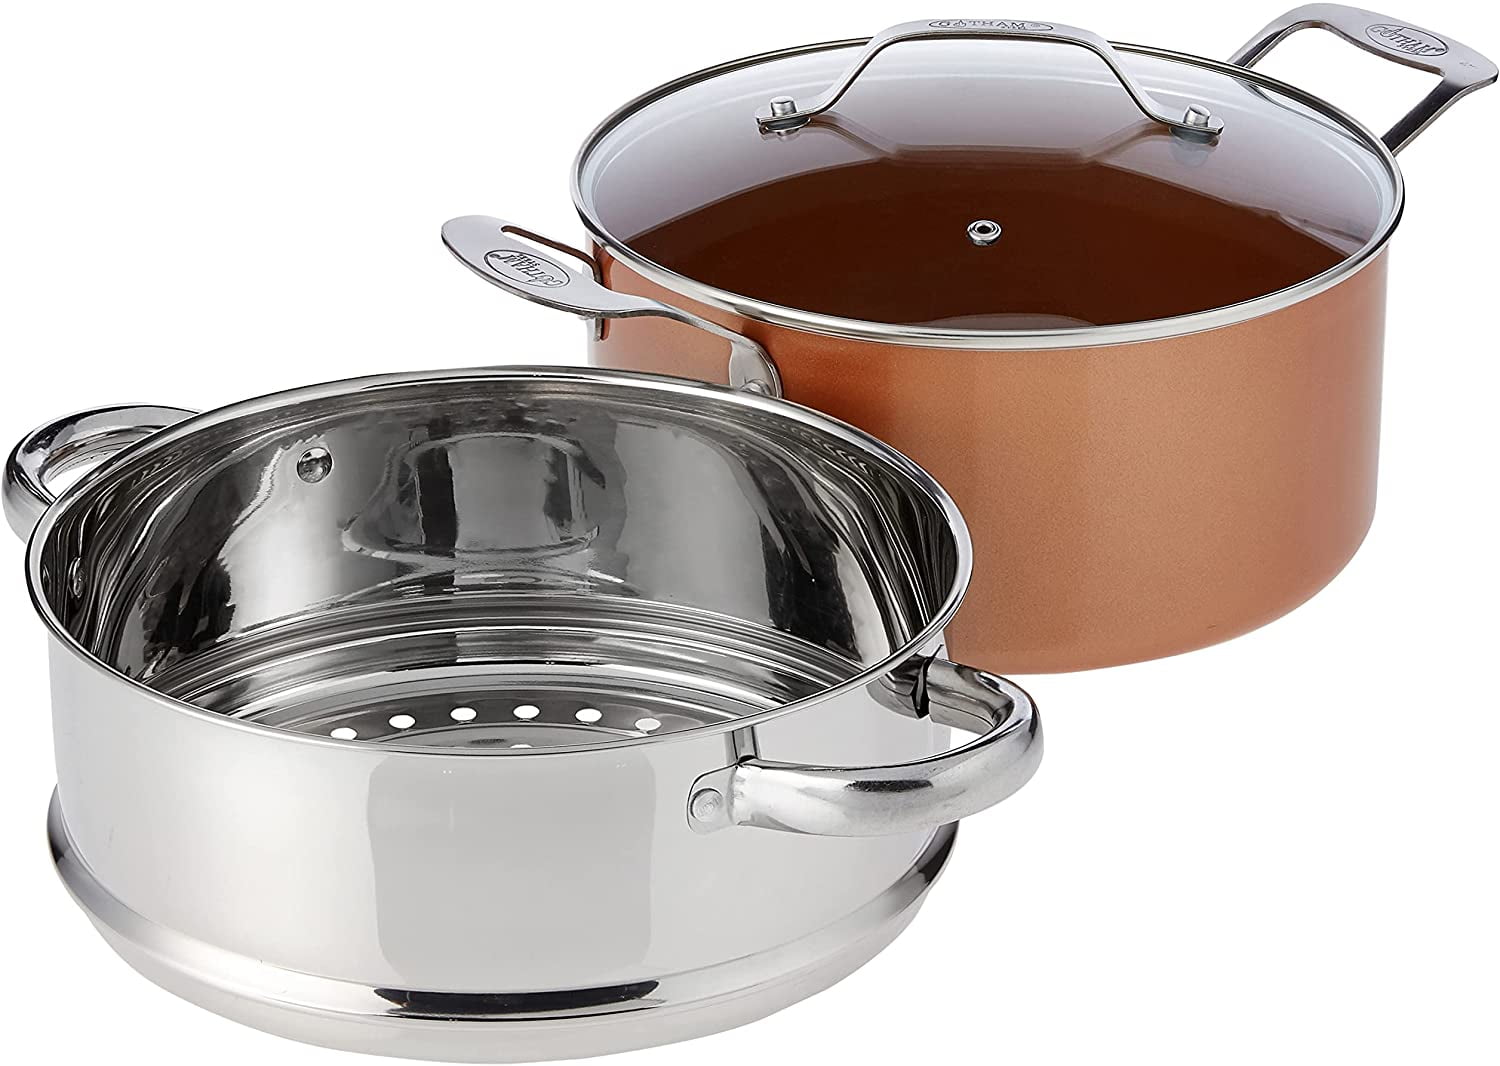 Gotham Steel Copper Pots and Pans Set, 10 Piece Nonstick Cookware set with Titanium Copper and Ceramic Coating, Dishwasher Safe and Oven Safe - 2